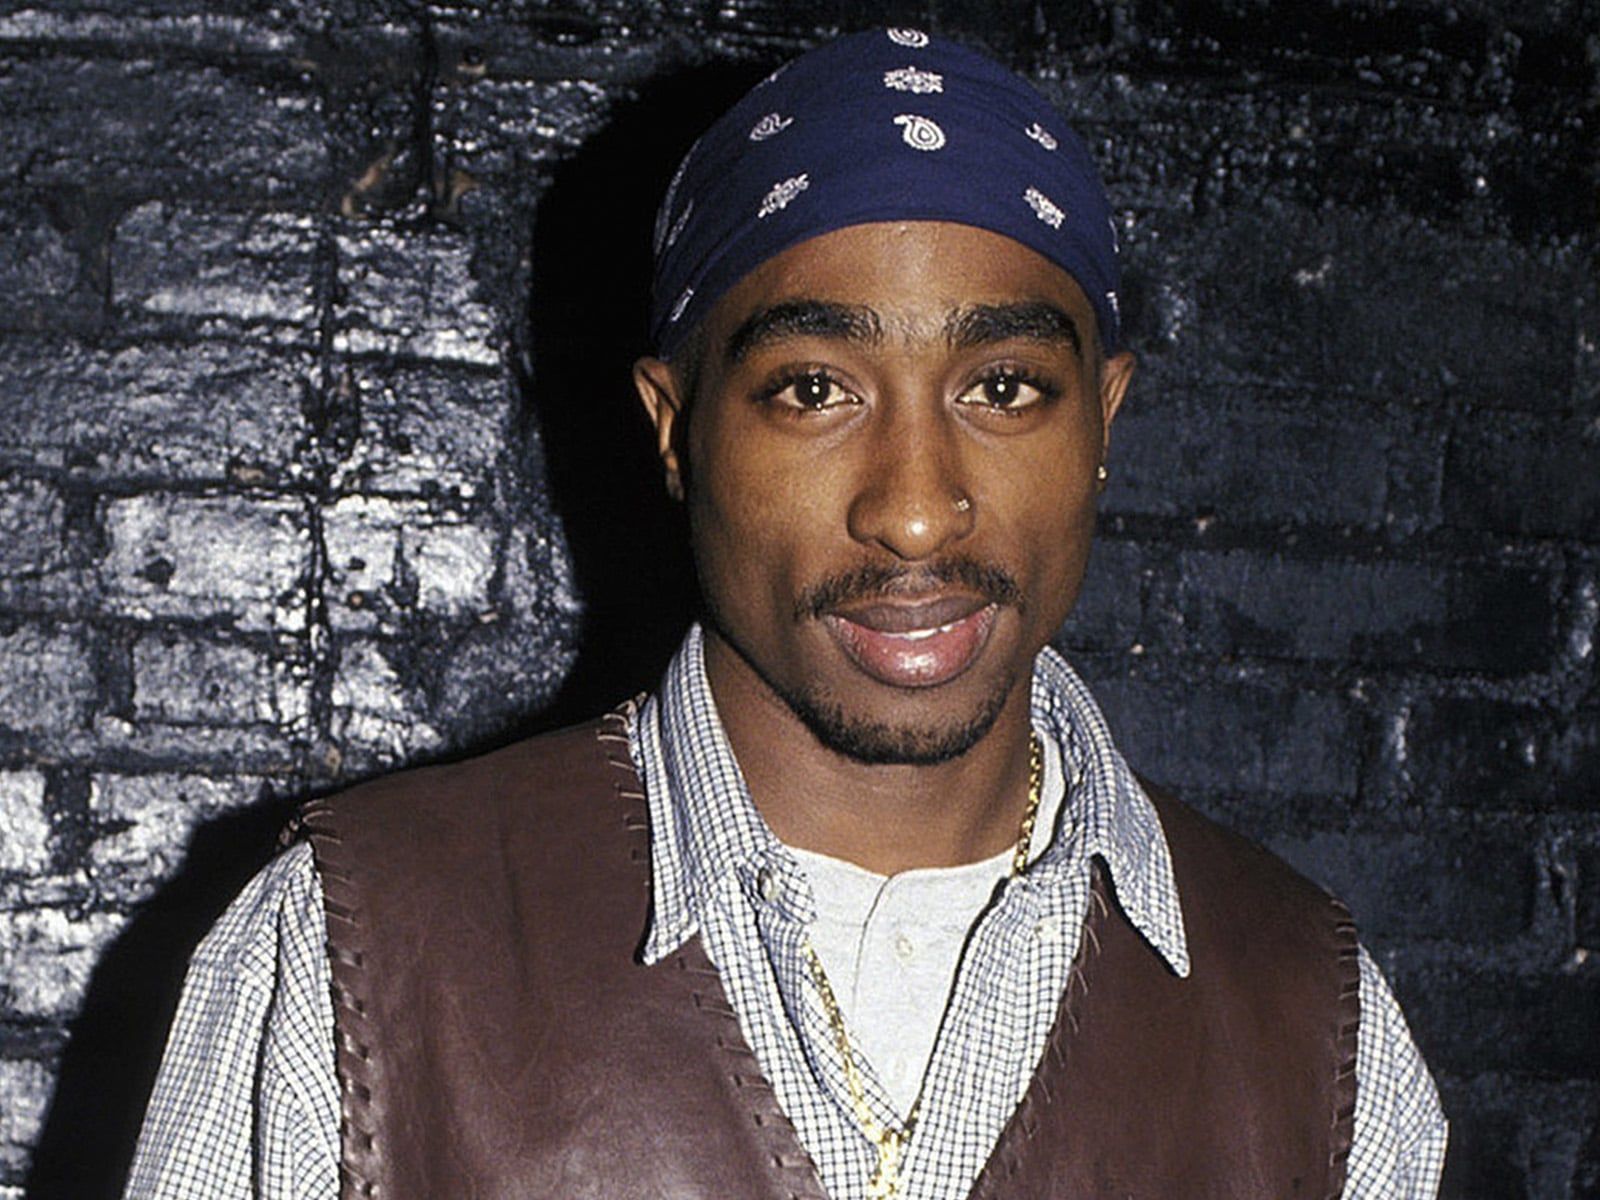 Tupac Shakur’s original Makaveli album cover painting up for auction